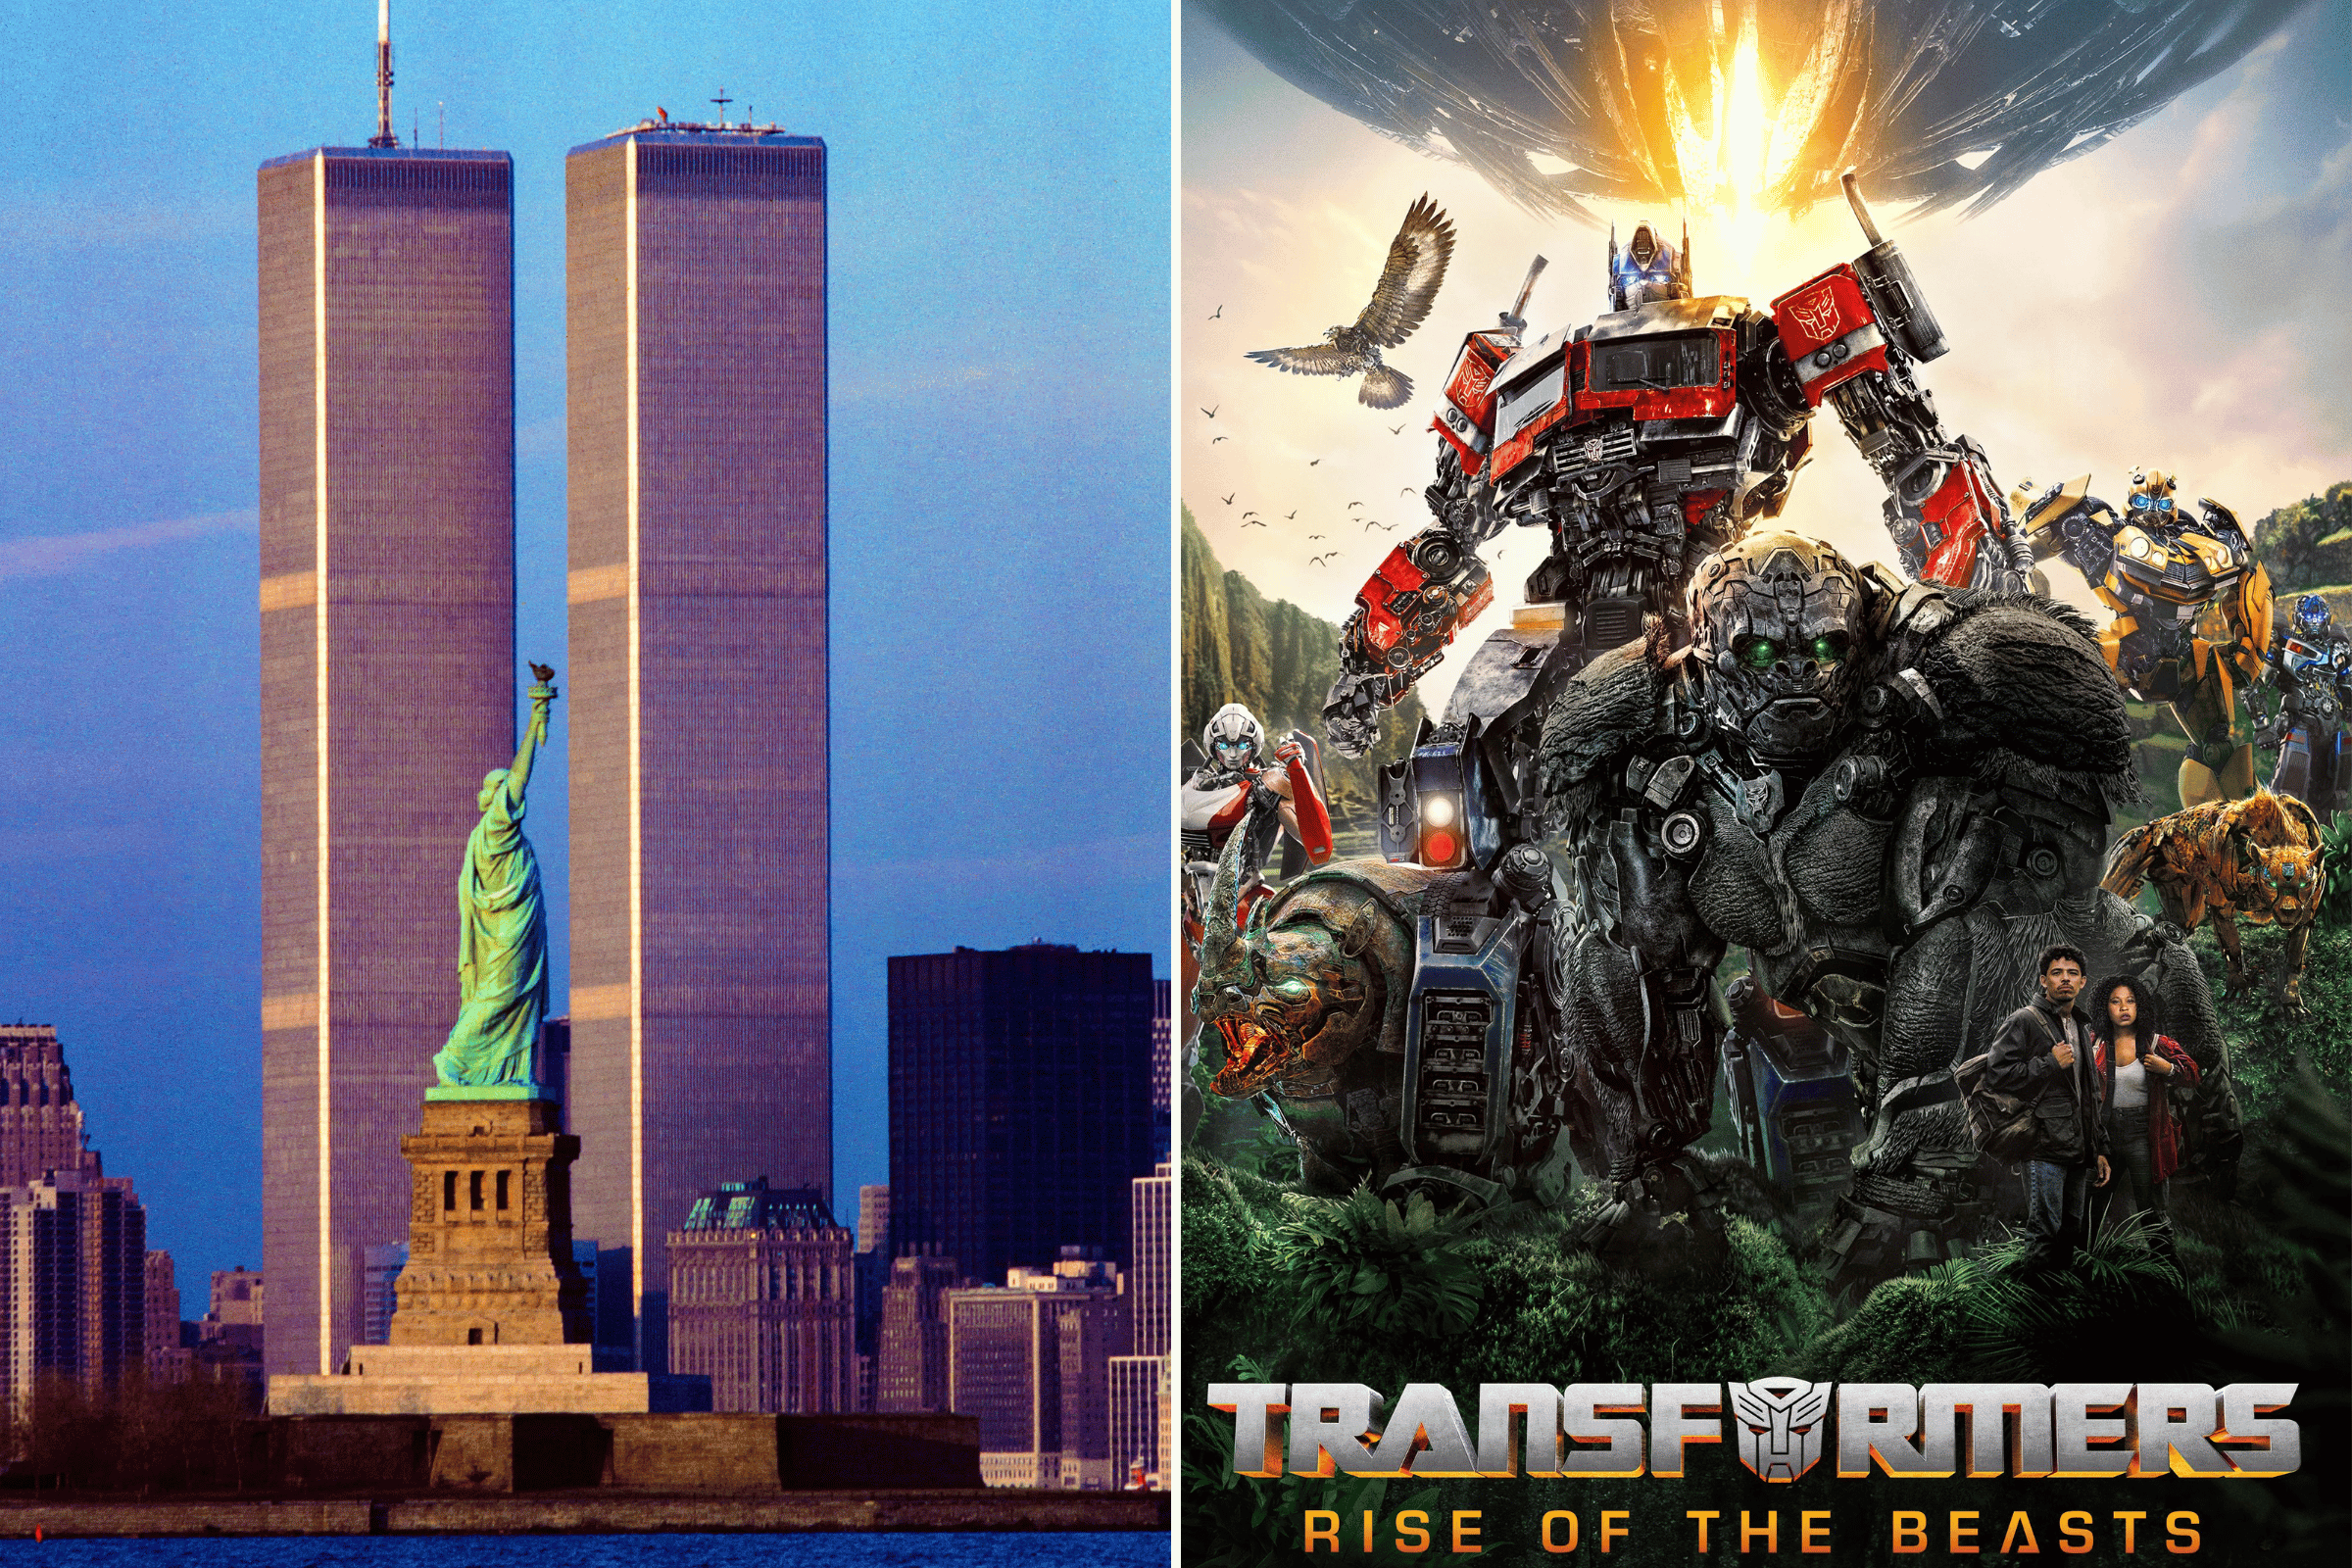 Transformers' Using 9/11 Imagery to Promote Movie Leaves Viewers Stunned